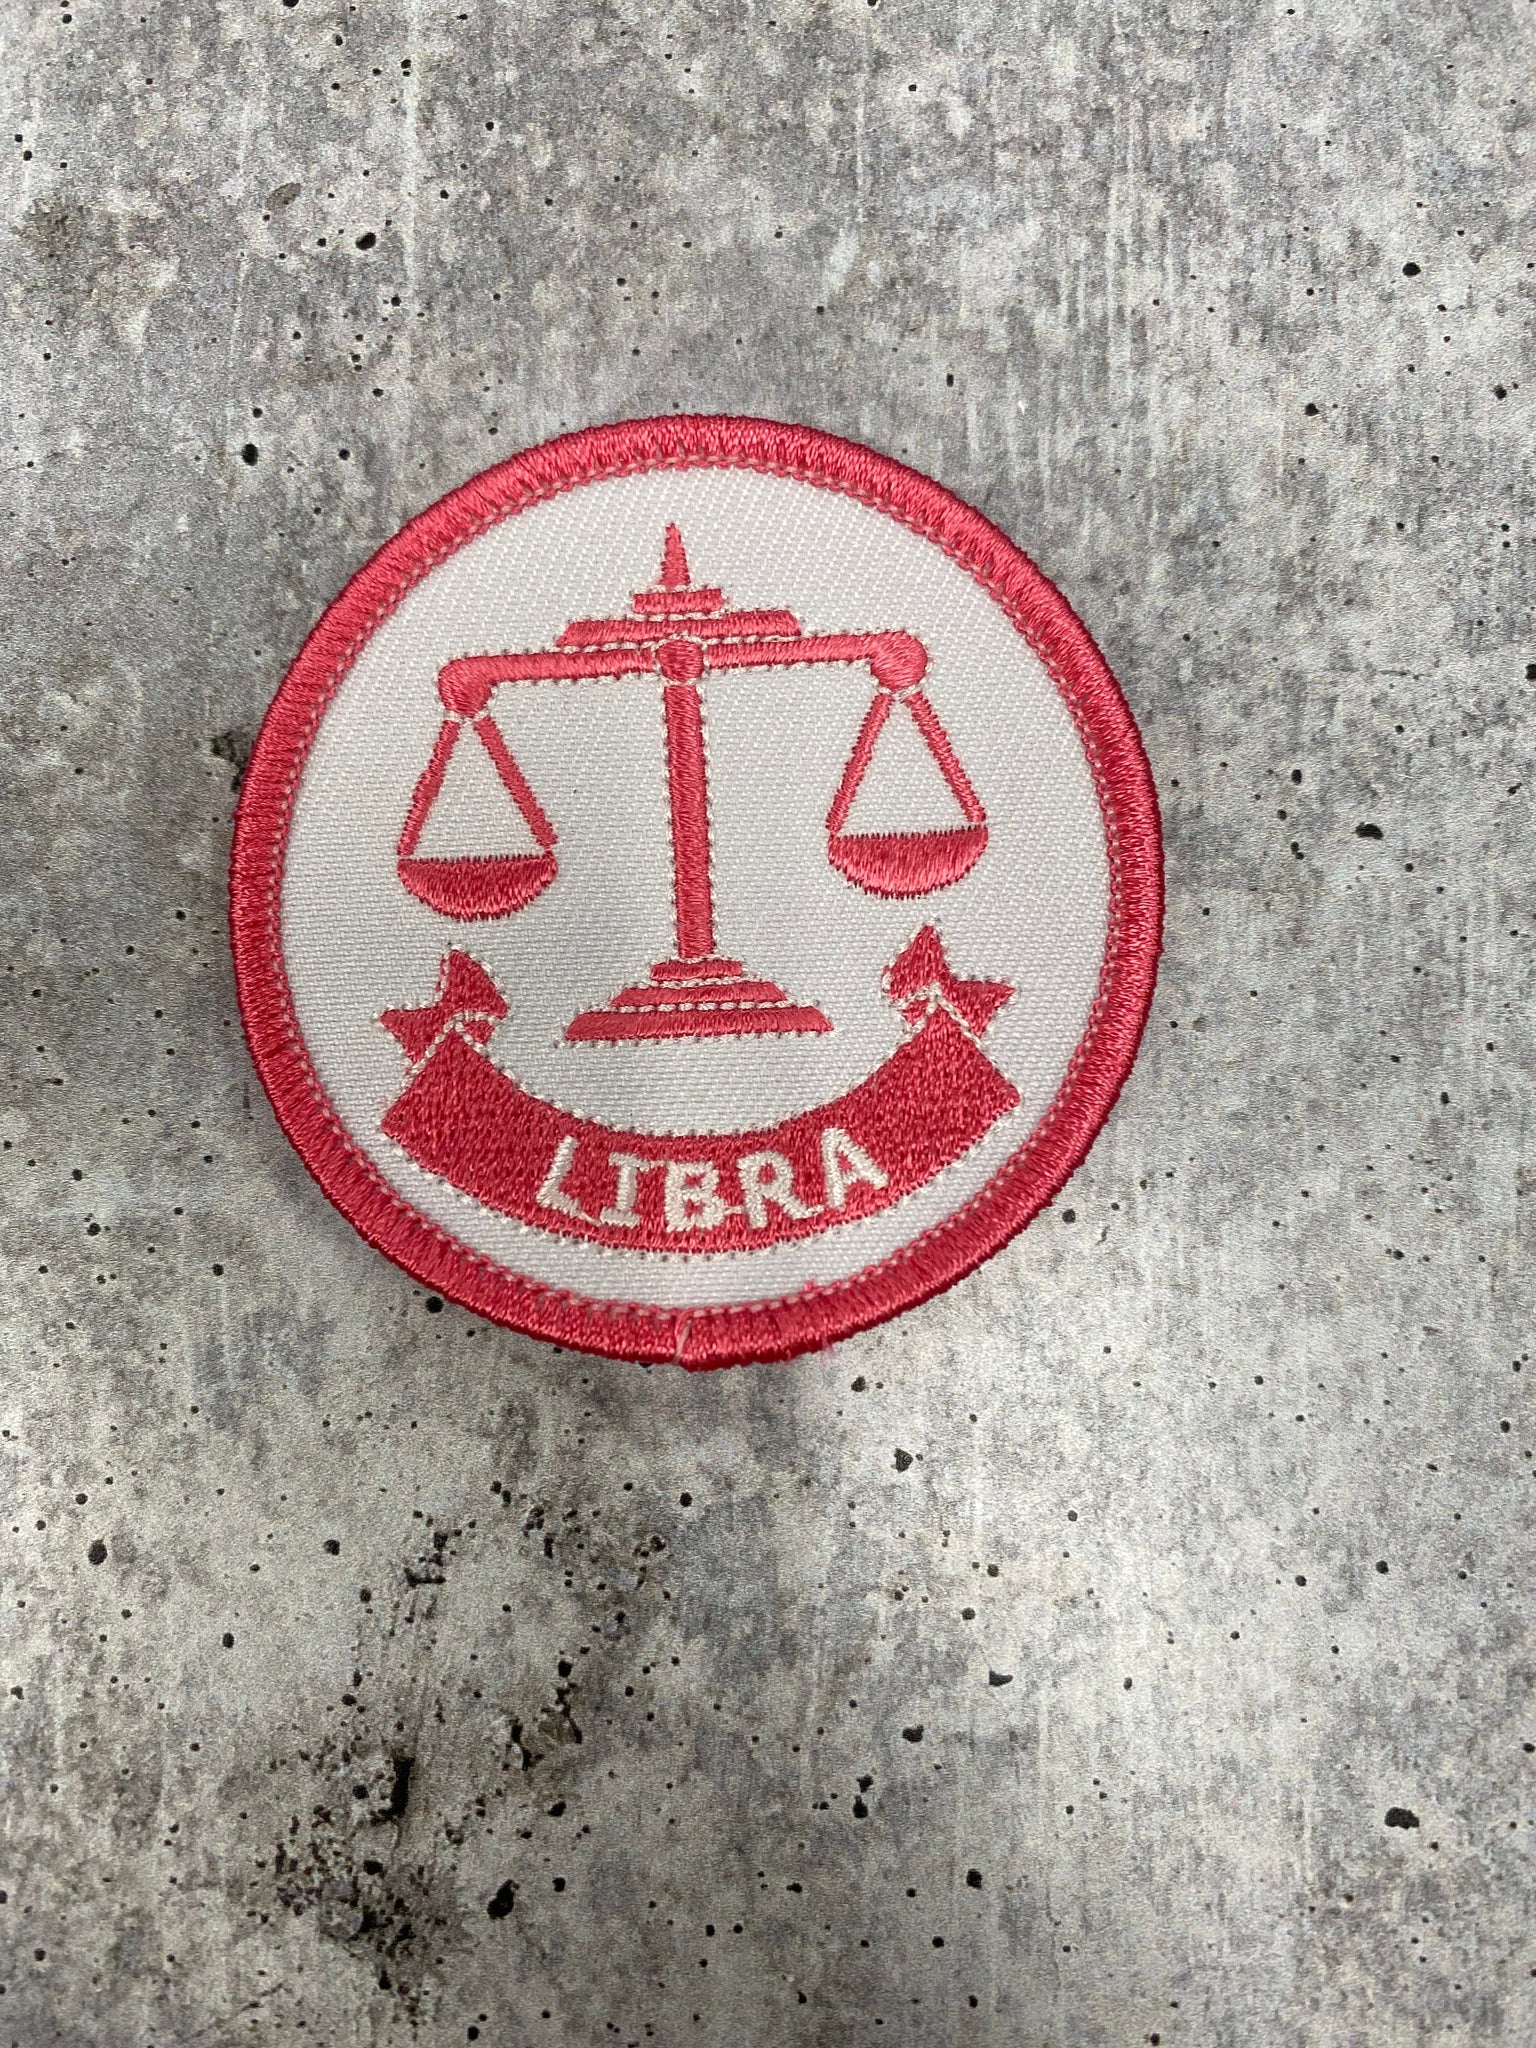 NEW, Fun, Vintage "Libra" Astrology Iron-On Patch, 1 Pc., 3 inch, Embroidered Zodiac Signs